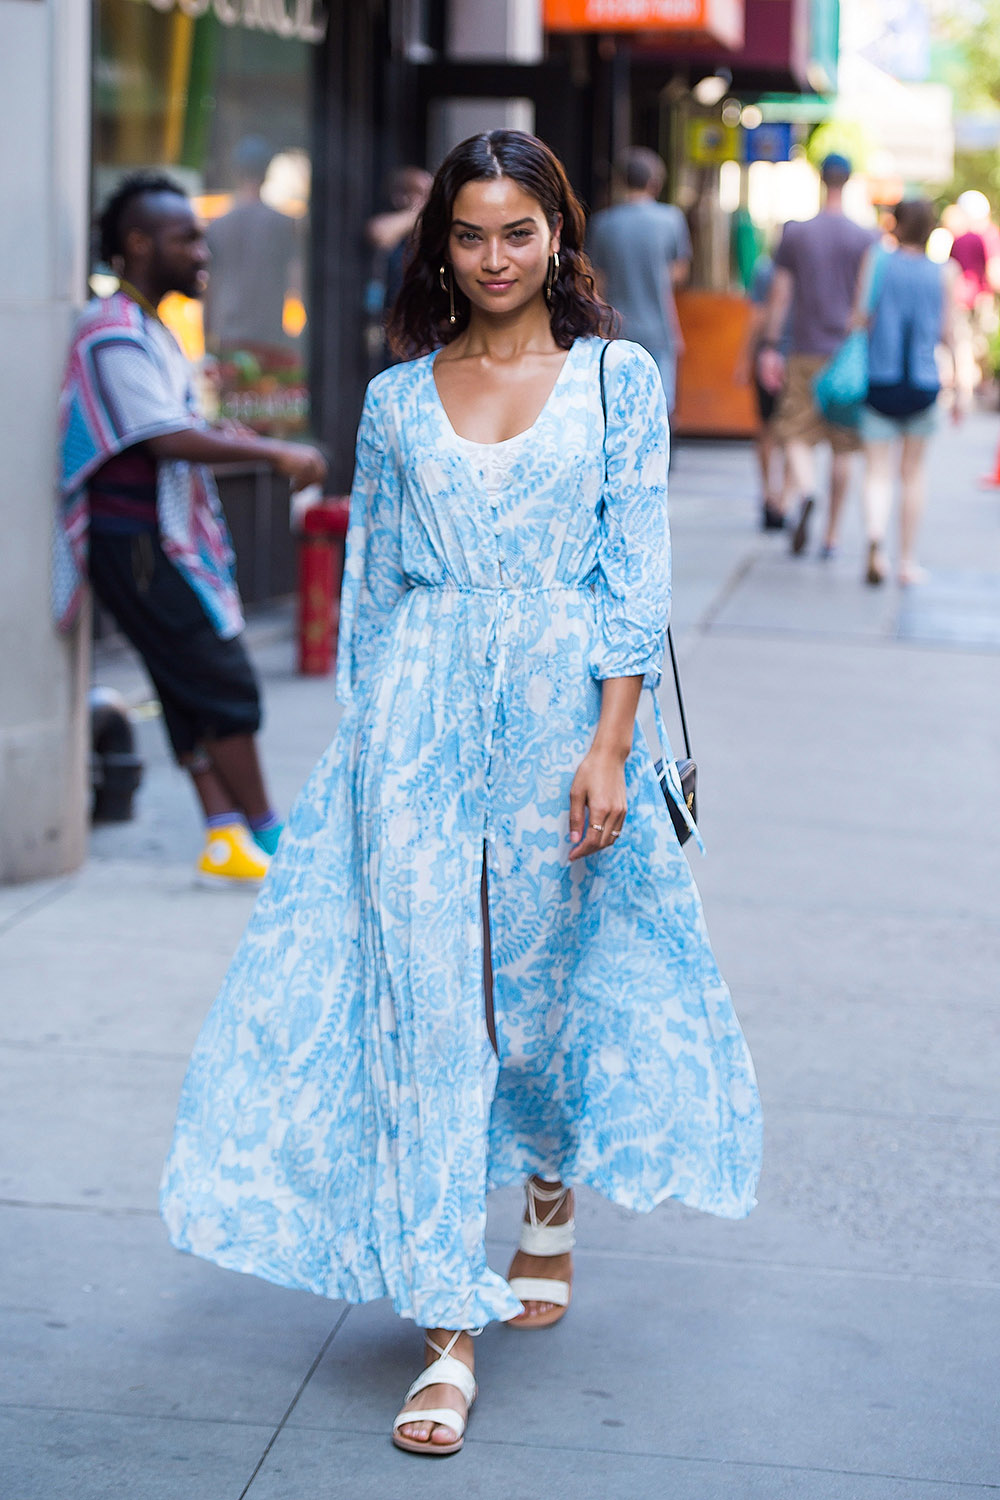 Model Shanina Shaik spotted in Midtown New York City in this summery number.